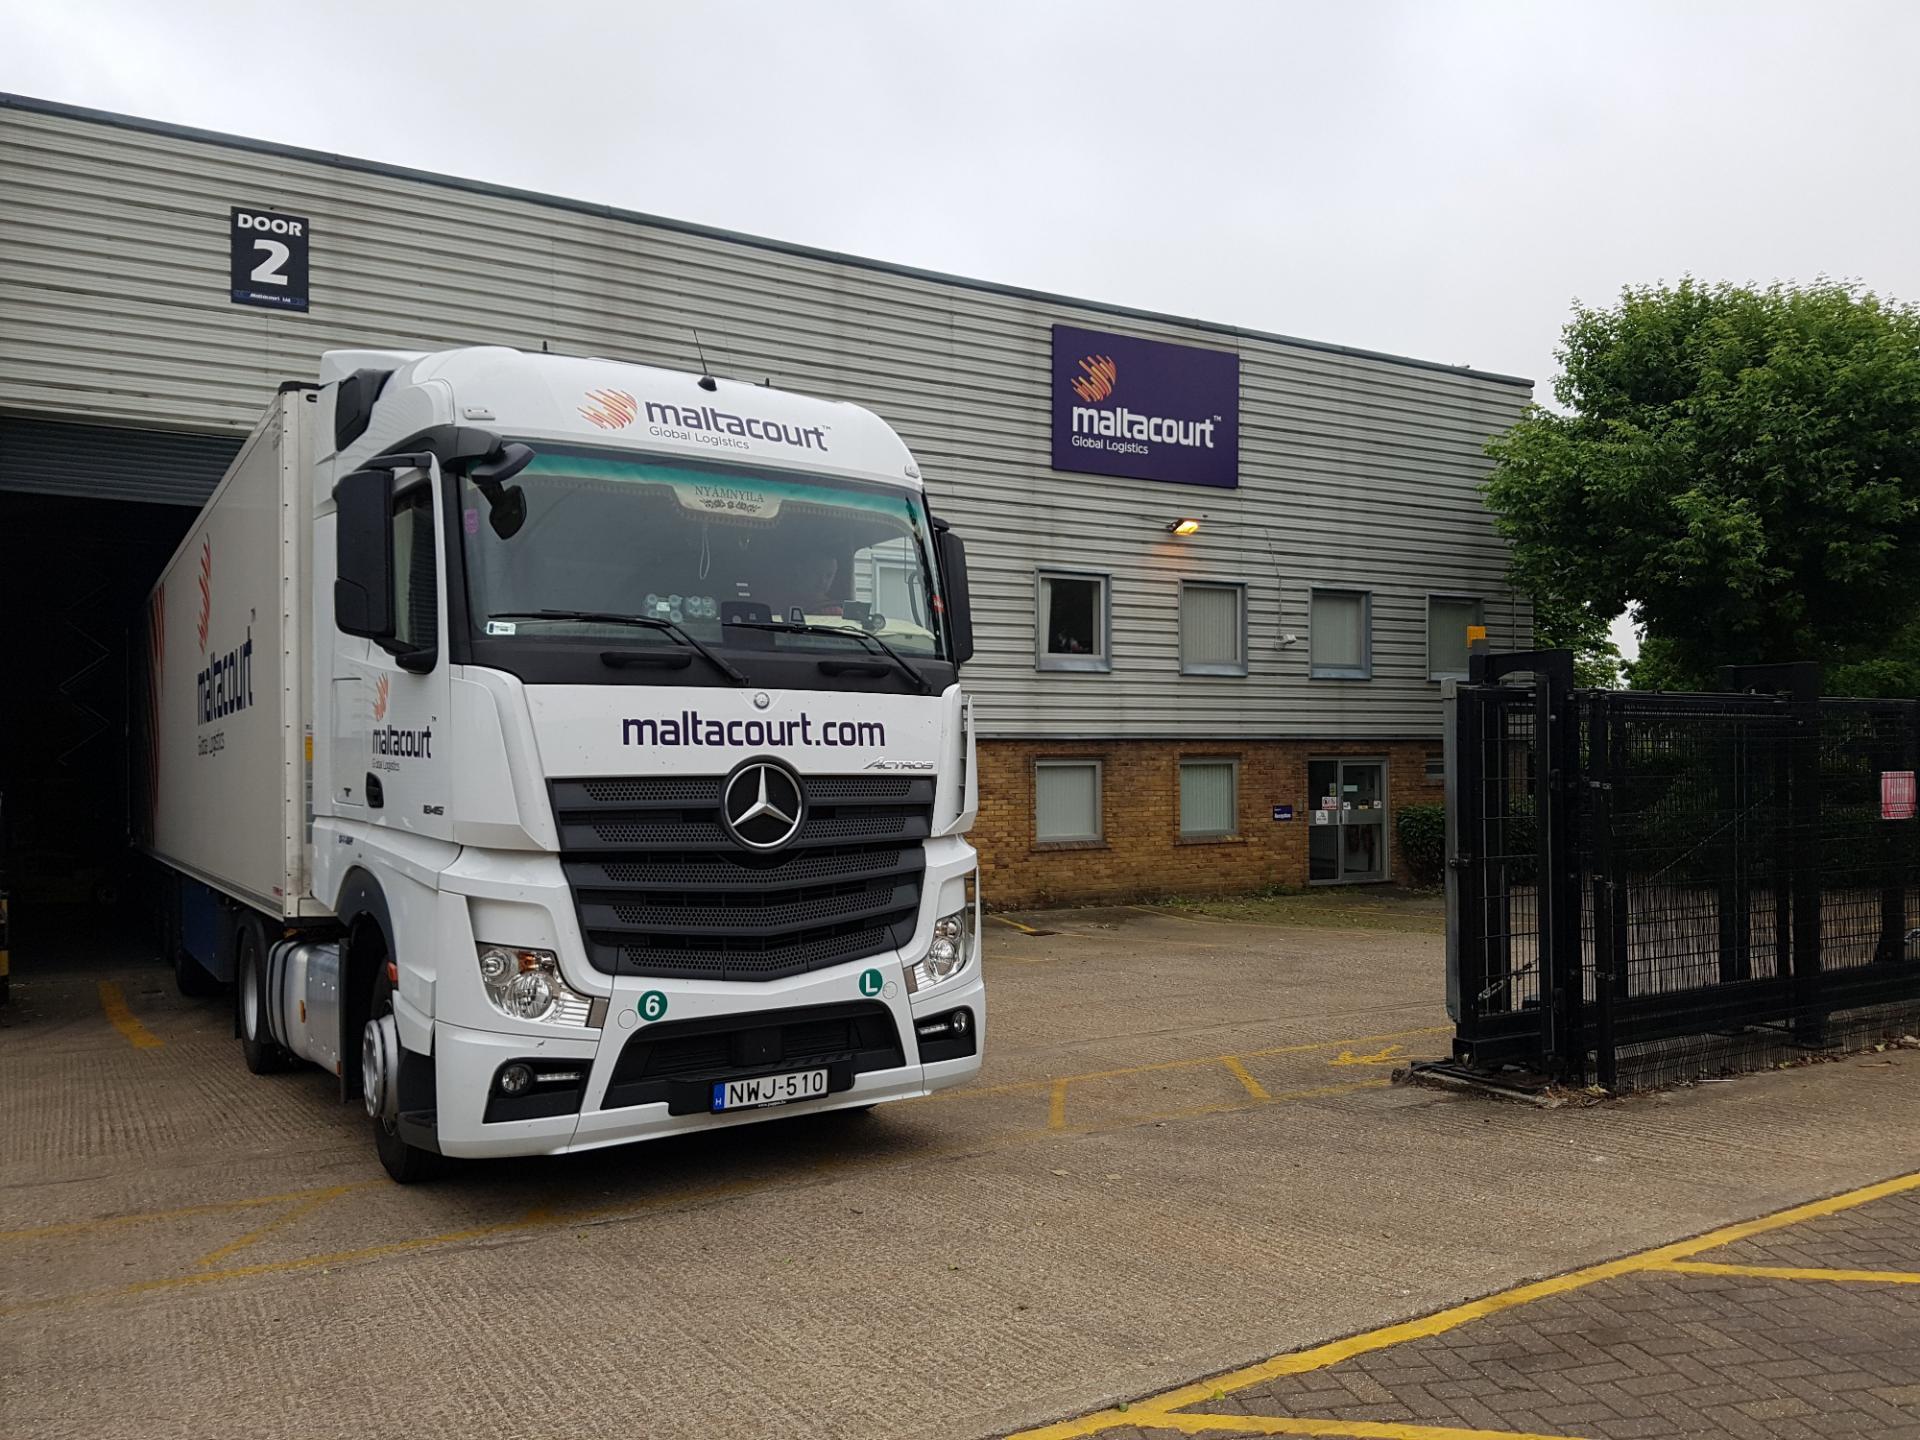 UK freight forwarding firm acquired by logistics multinational